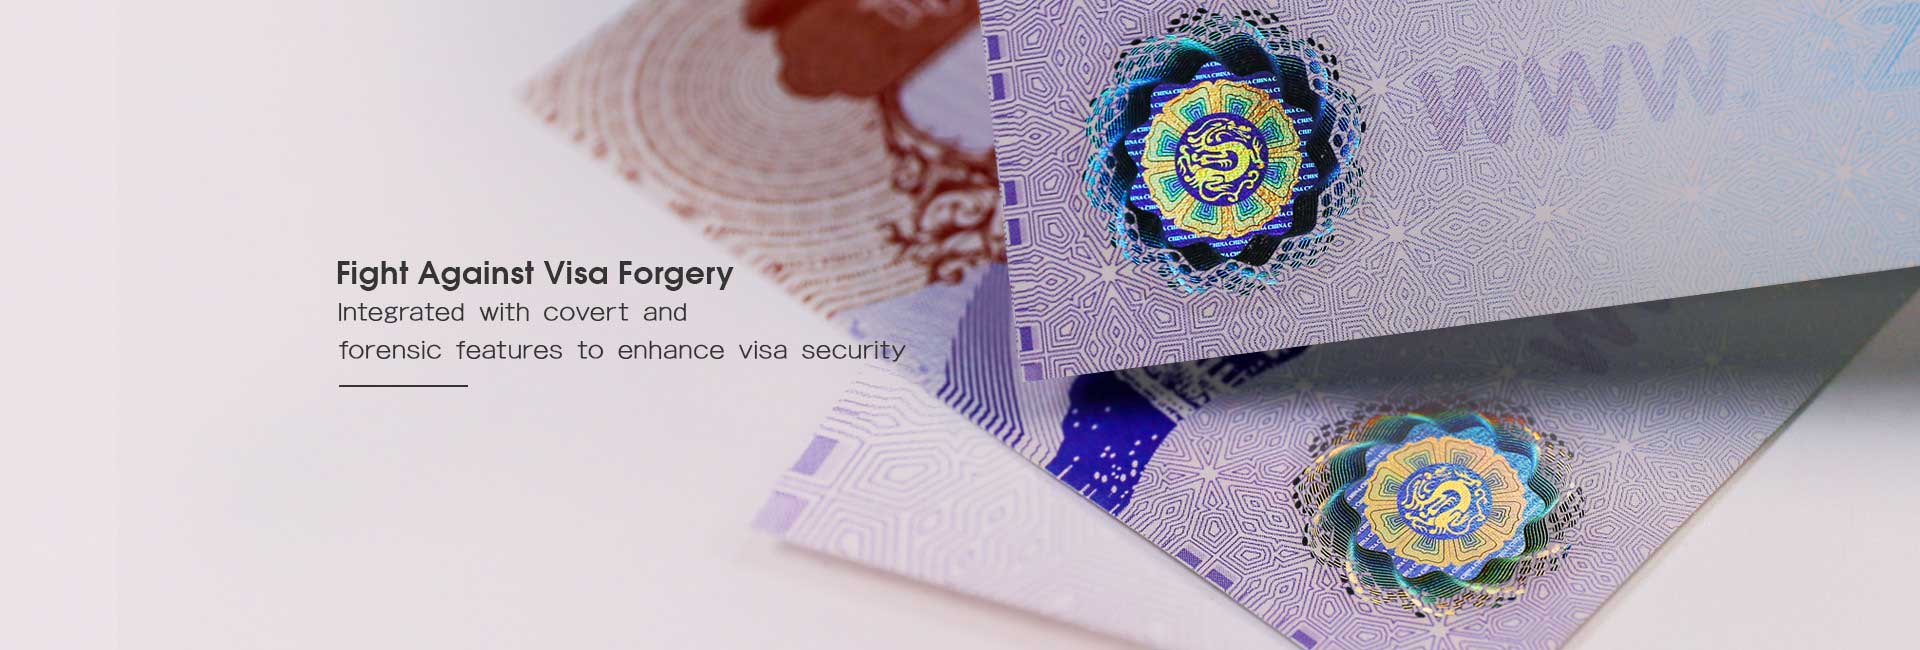 szimage solutions to fight against visa forgery